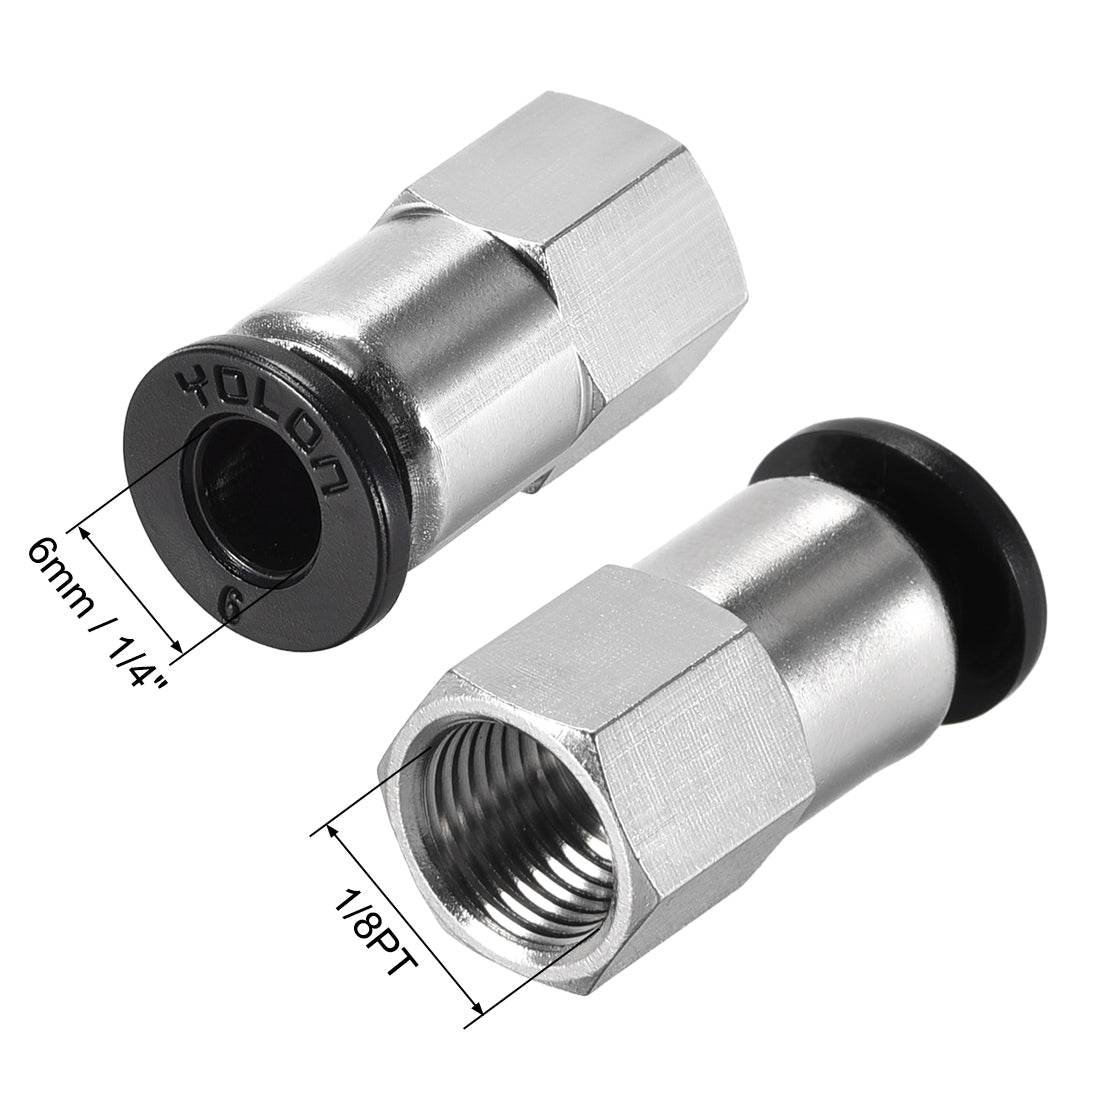 uxcell Uxcell Push to Connect Tube Fitting Adapter 6mm Tube OD x 1/8 PT Female Straight Pneumatic Connecter Pipe Fitting 4pcs